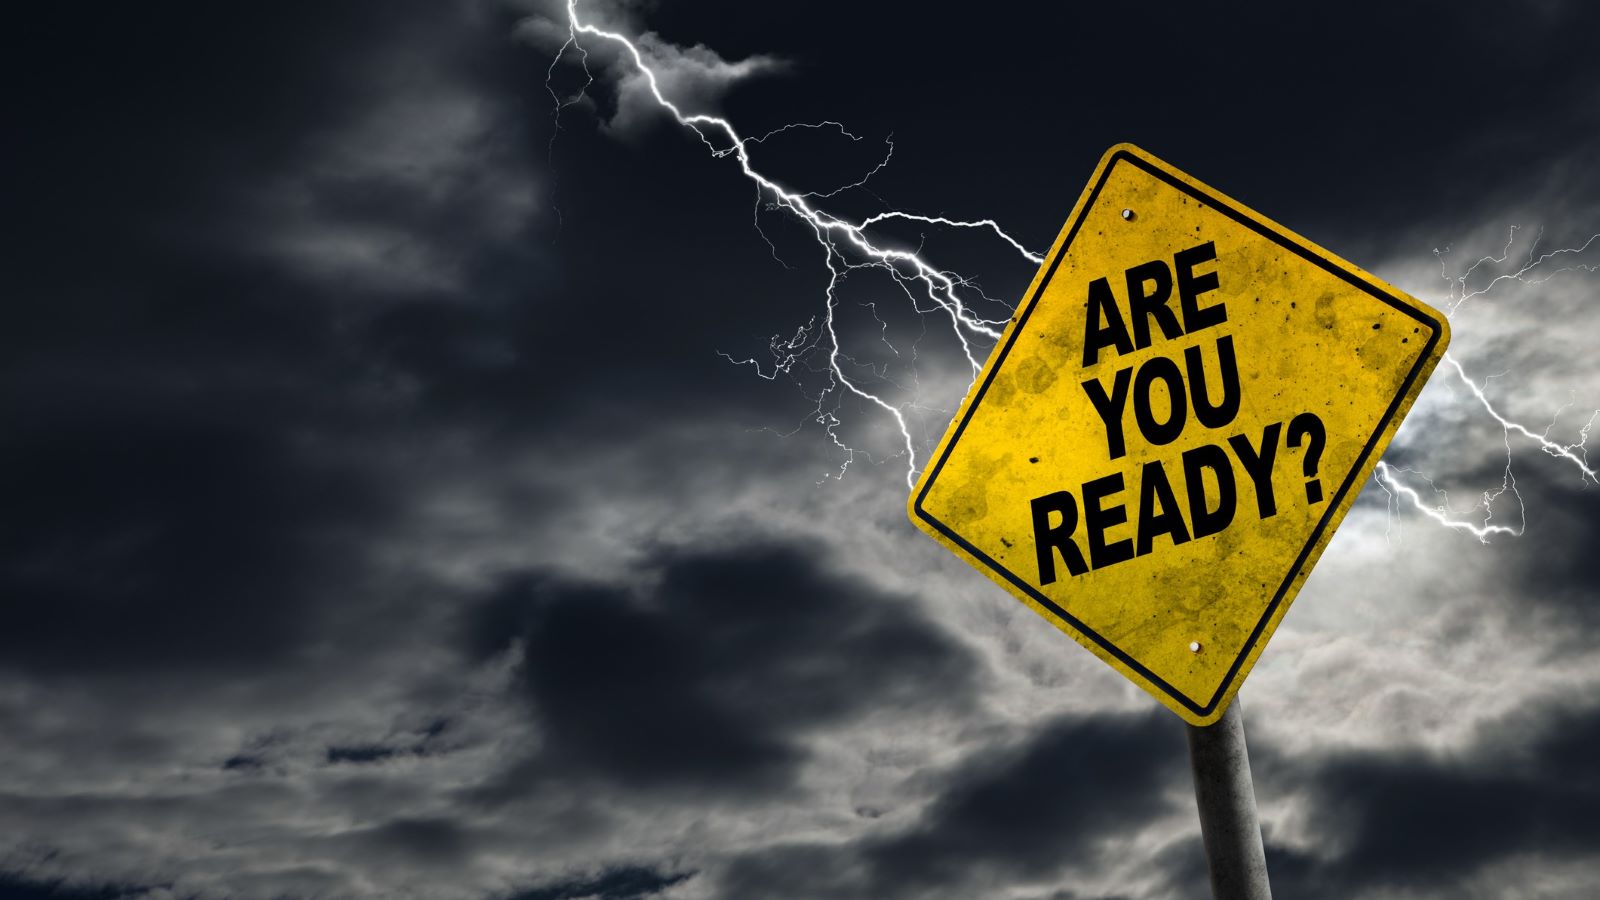 Sign that reads "Are You Ready?" with lightning and dark skies in the background